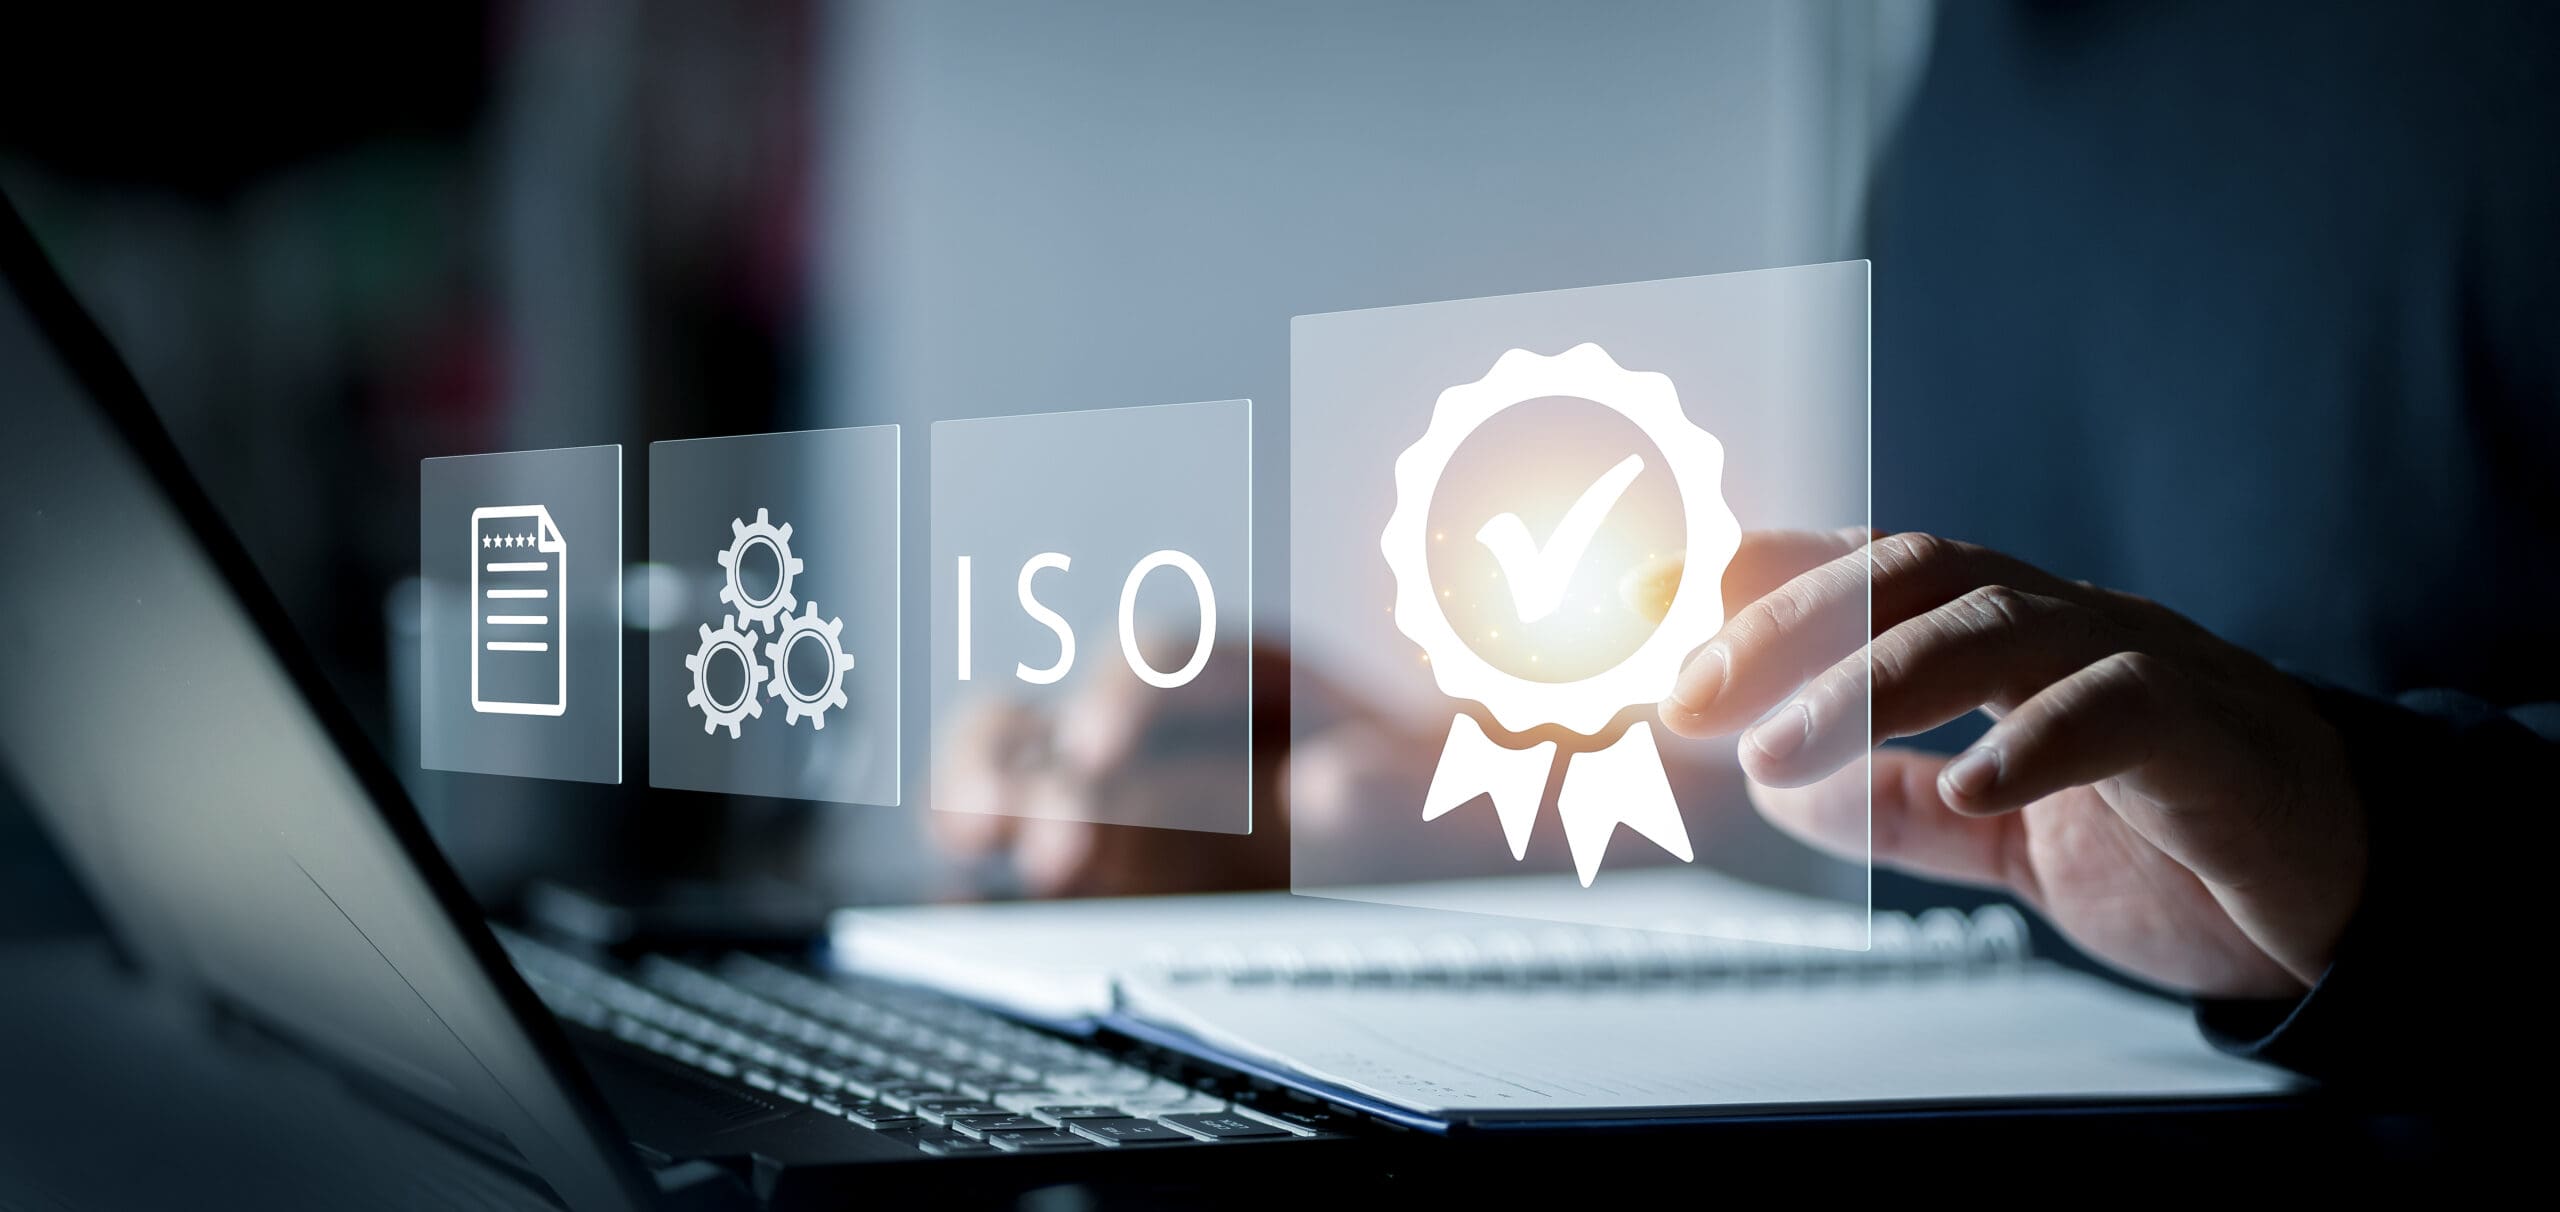 What Role Does a LIMS Play in ISO 17025 Accreditation & Compliance? | LabLynx Resources